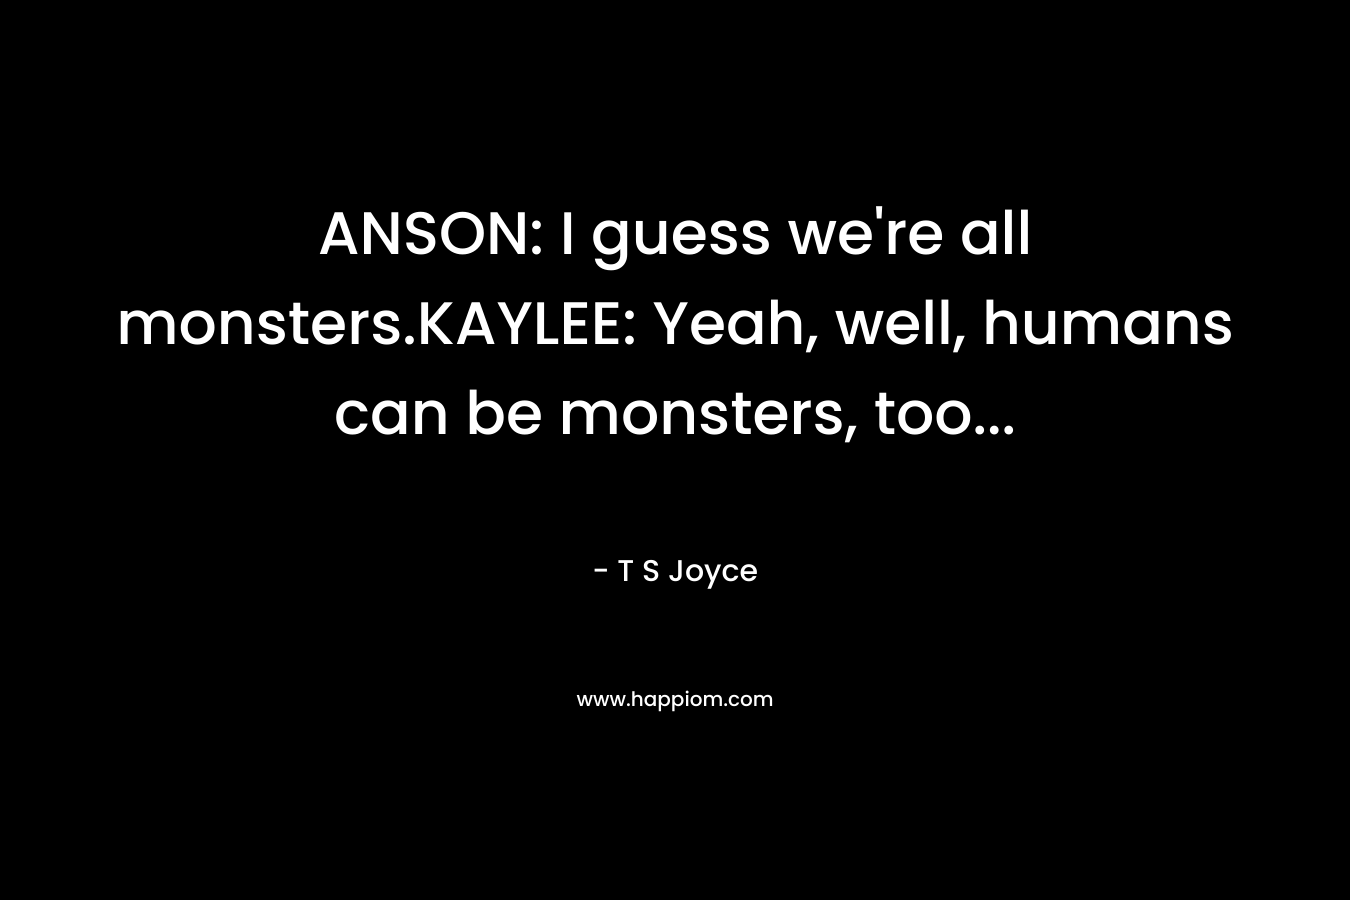 ANSON: I guess we're all monsters.KAYLEE: Yeah, well, humans can be monsters, too...